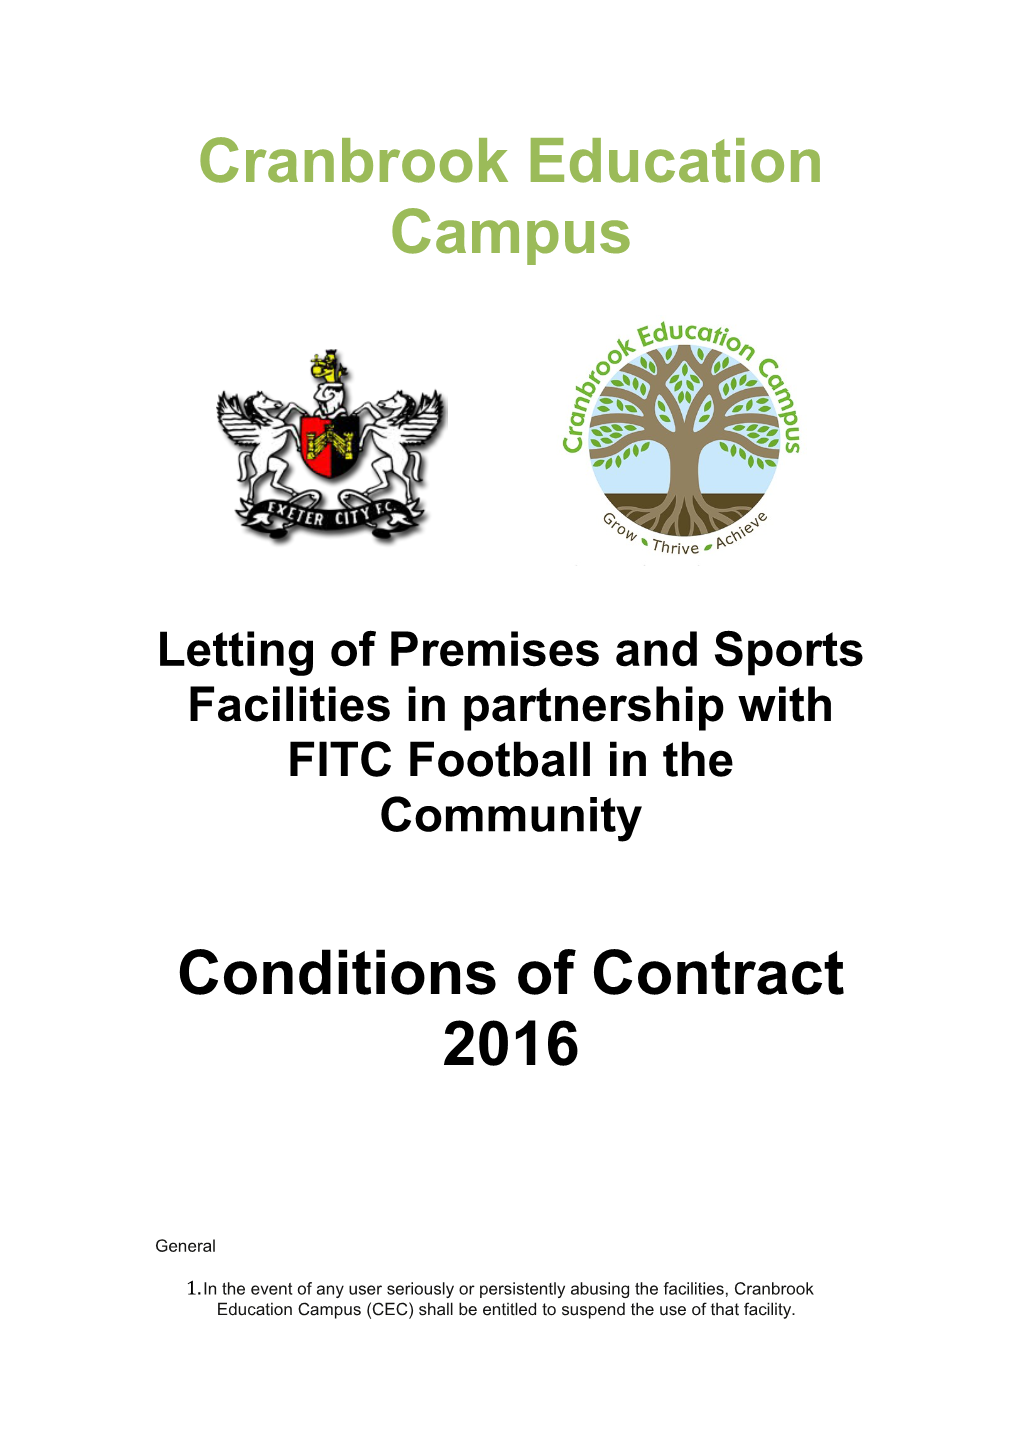 Letting of Premises and Sports Facilities in Partnership with FITC Football in the Community